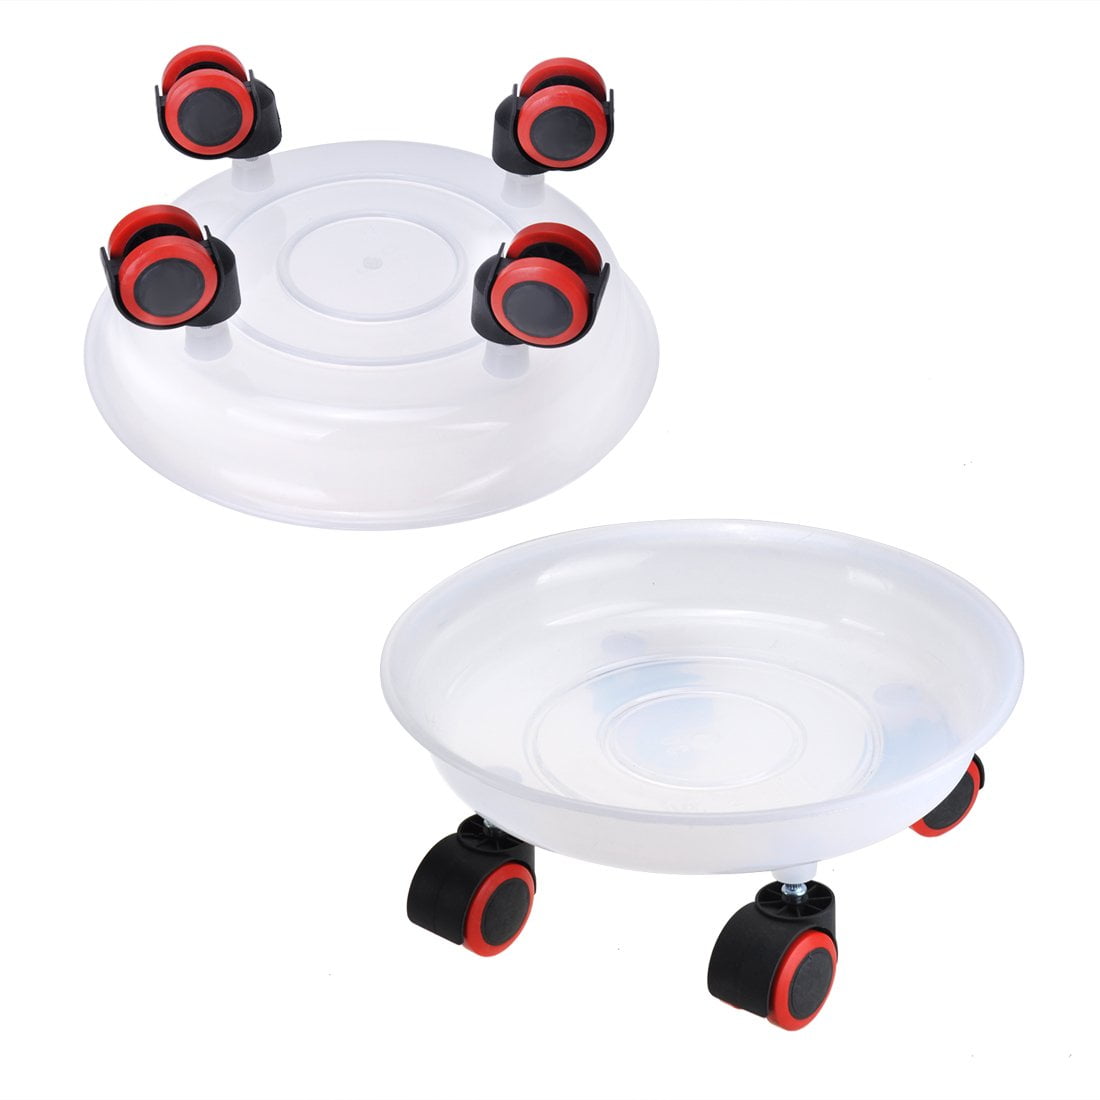 s with Castors Details about   13 inch Deluxe Round Plant Dolly 